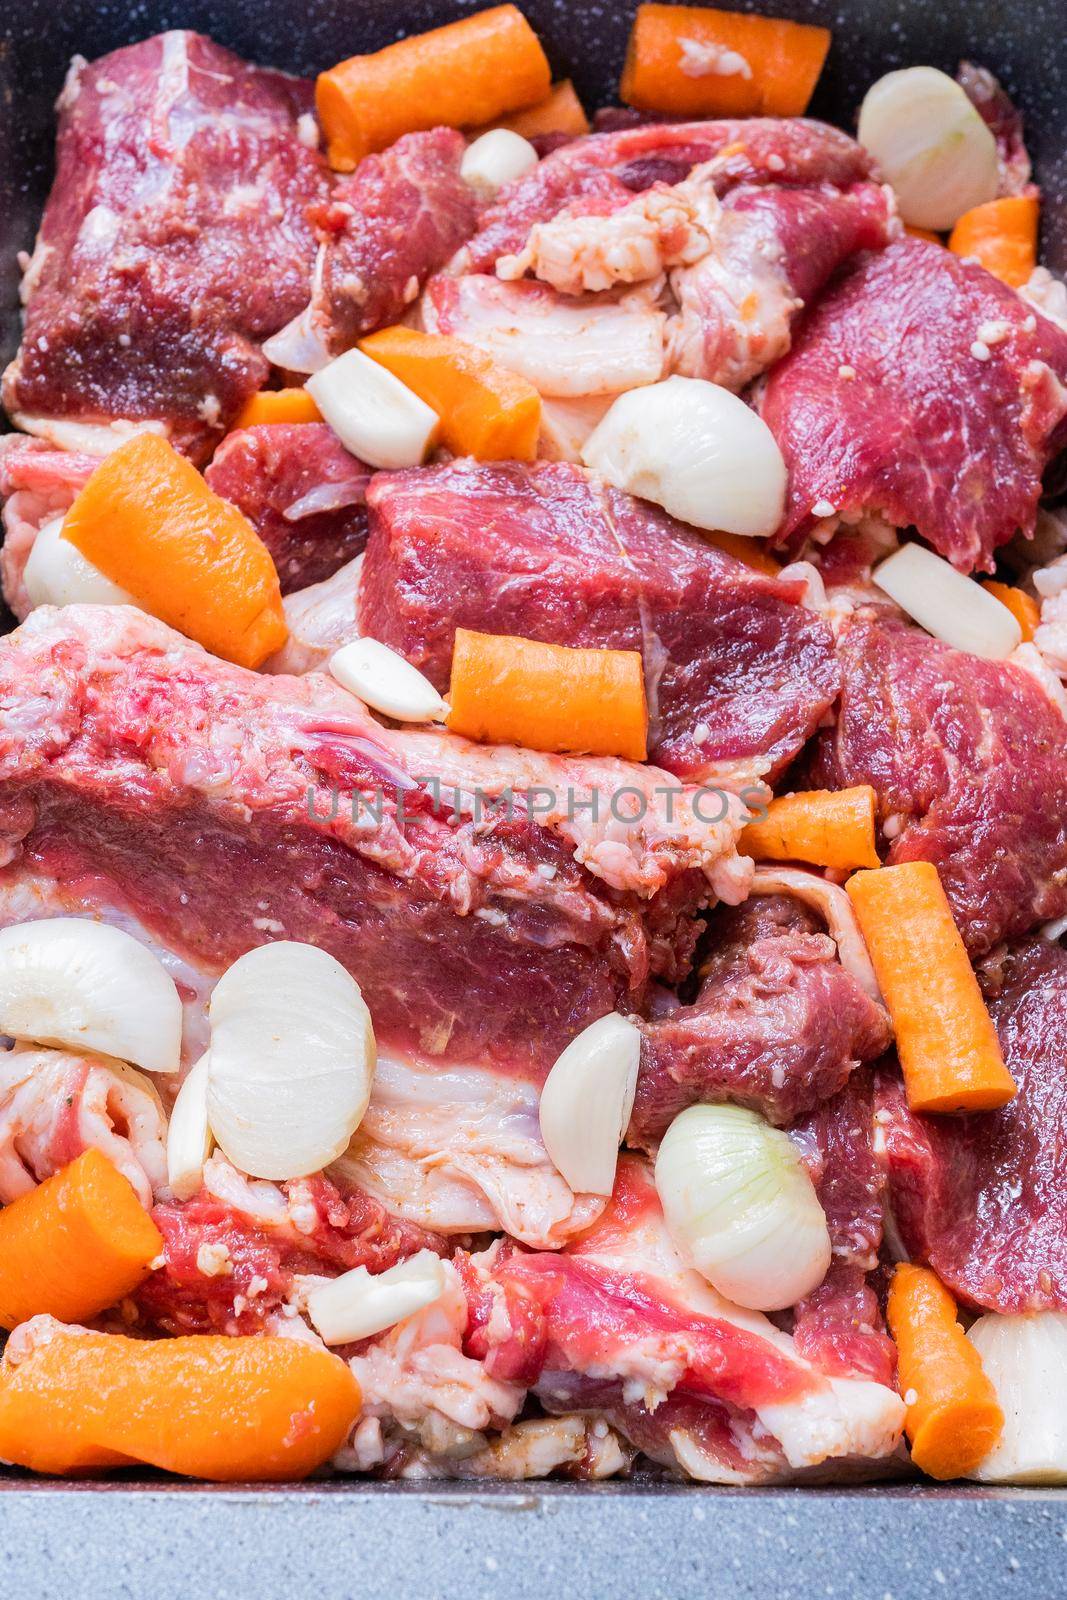 lamb meat on a baking sheet marinated with spices, vegetable oil, carrots and onions ready for baking in the oven or roasting